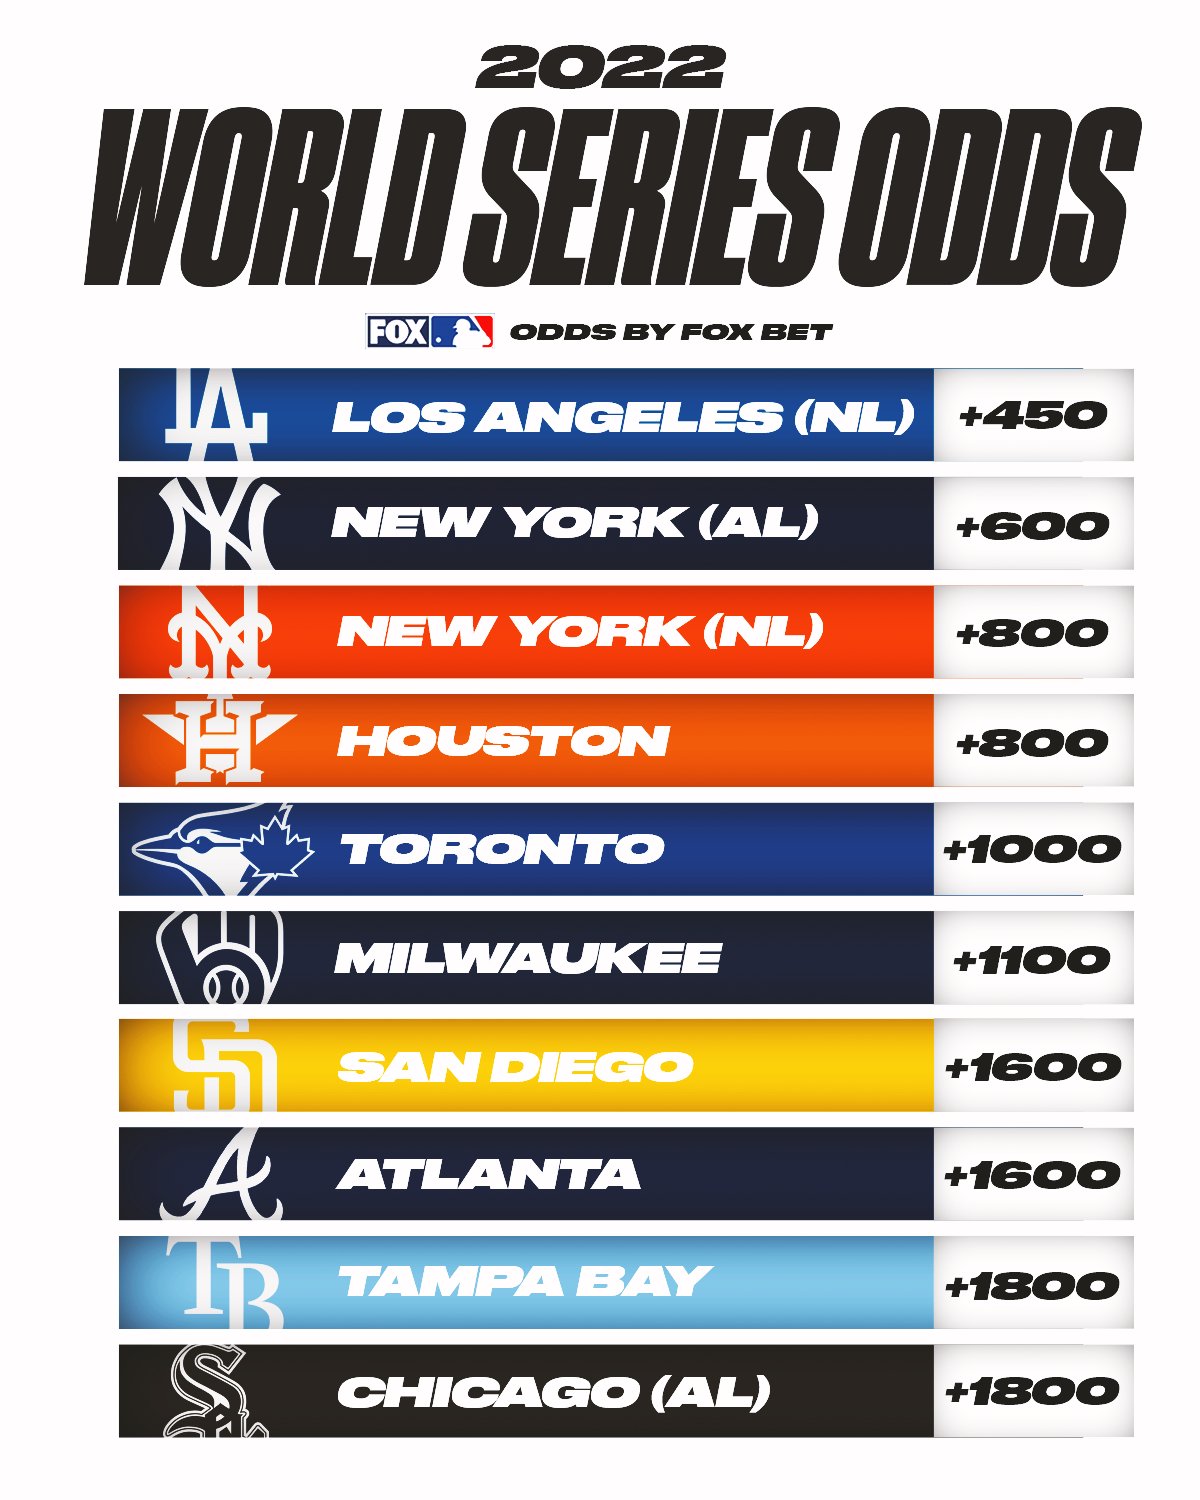 FOX Sports MLB on Twitter "Here are the current 2022 World Series